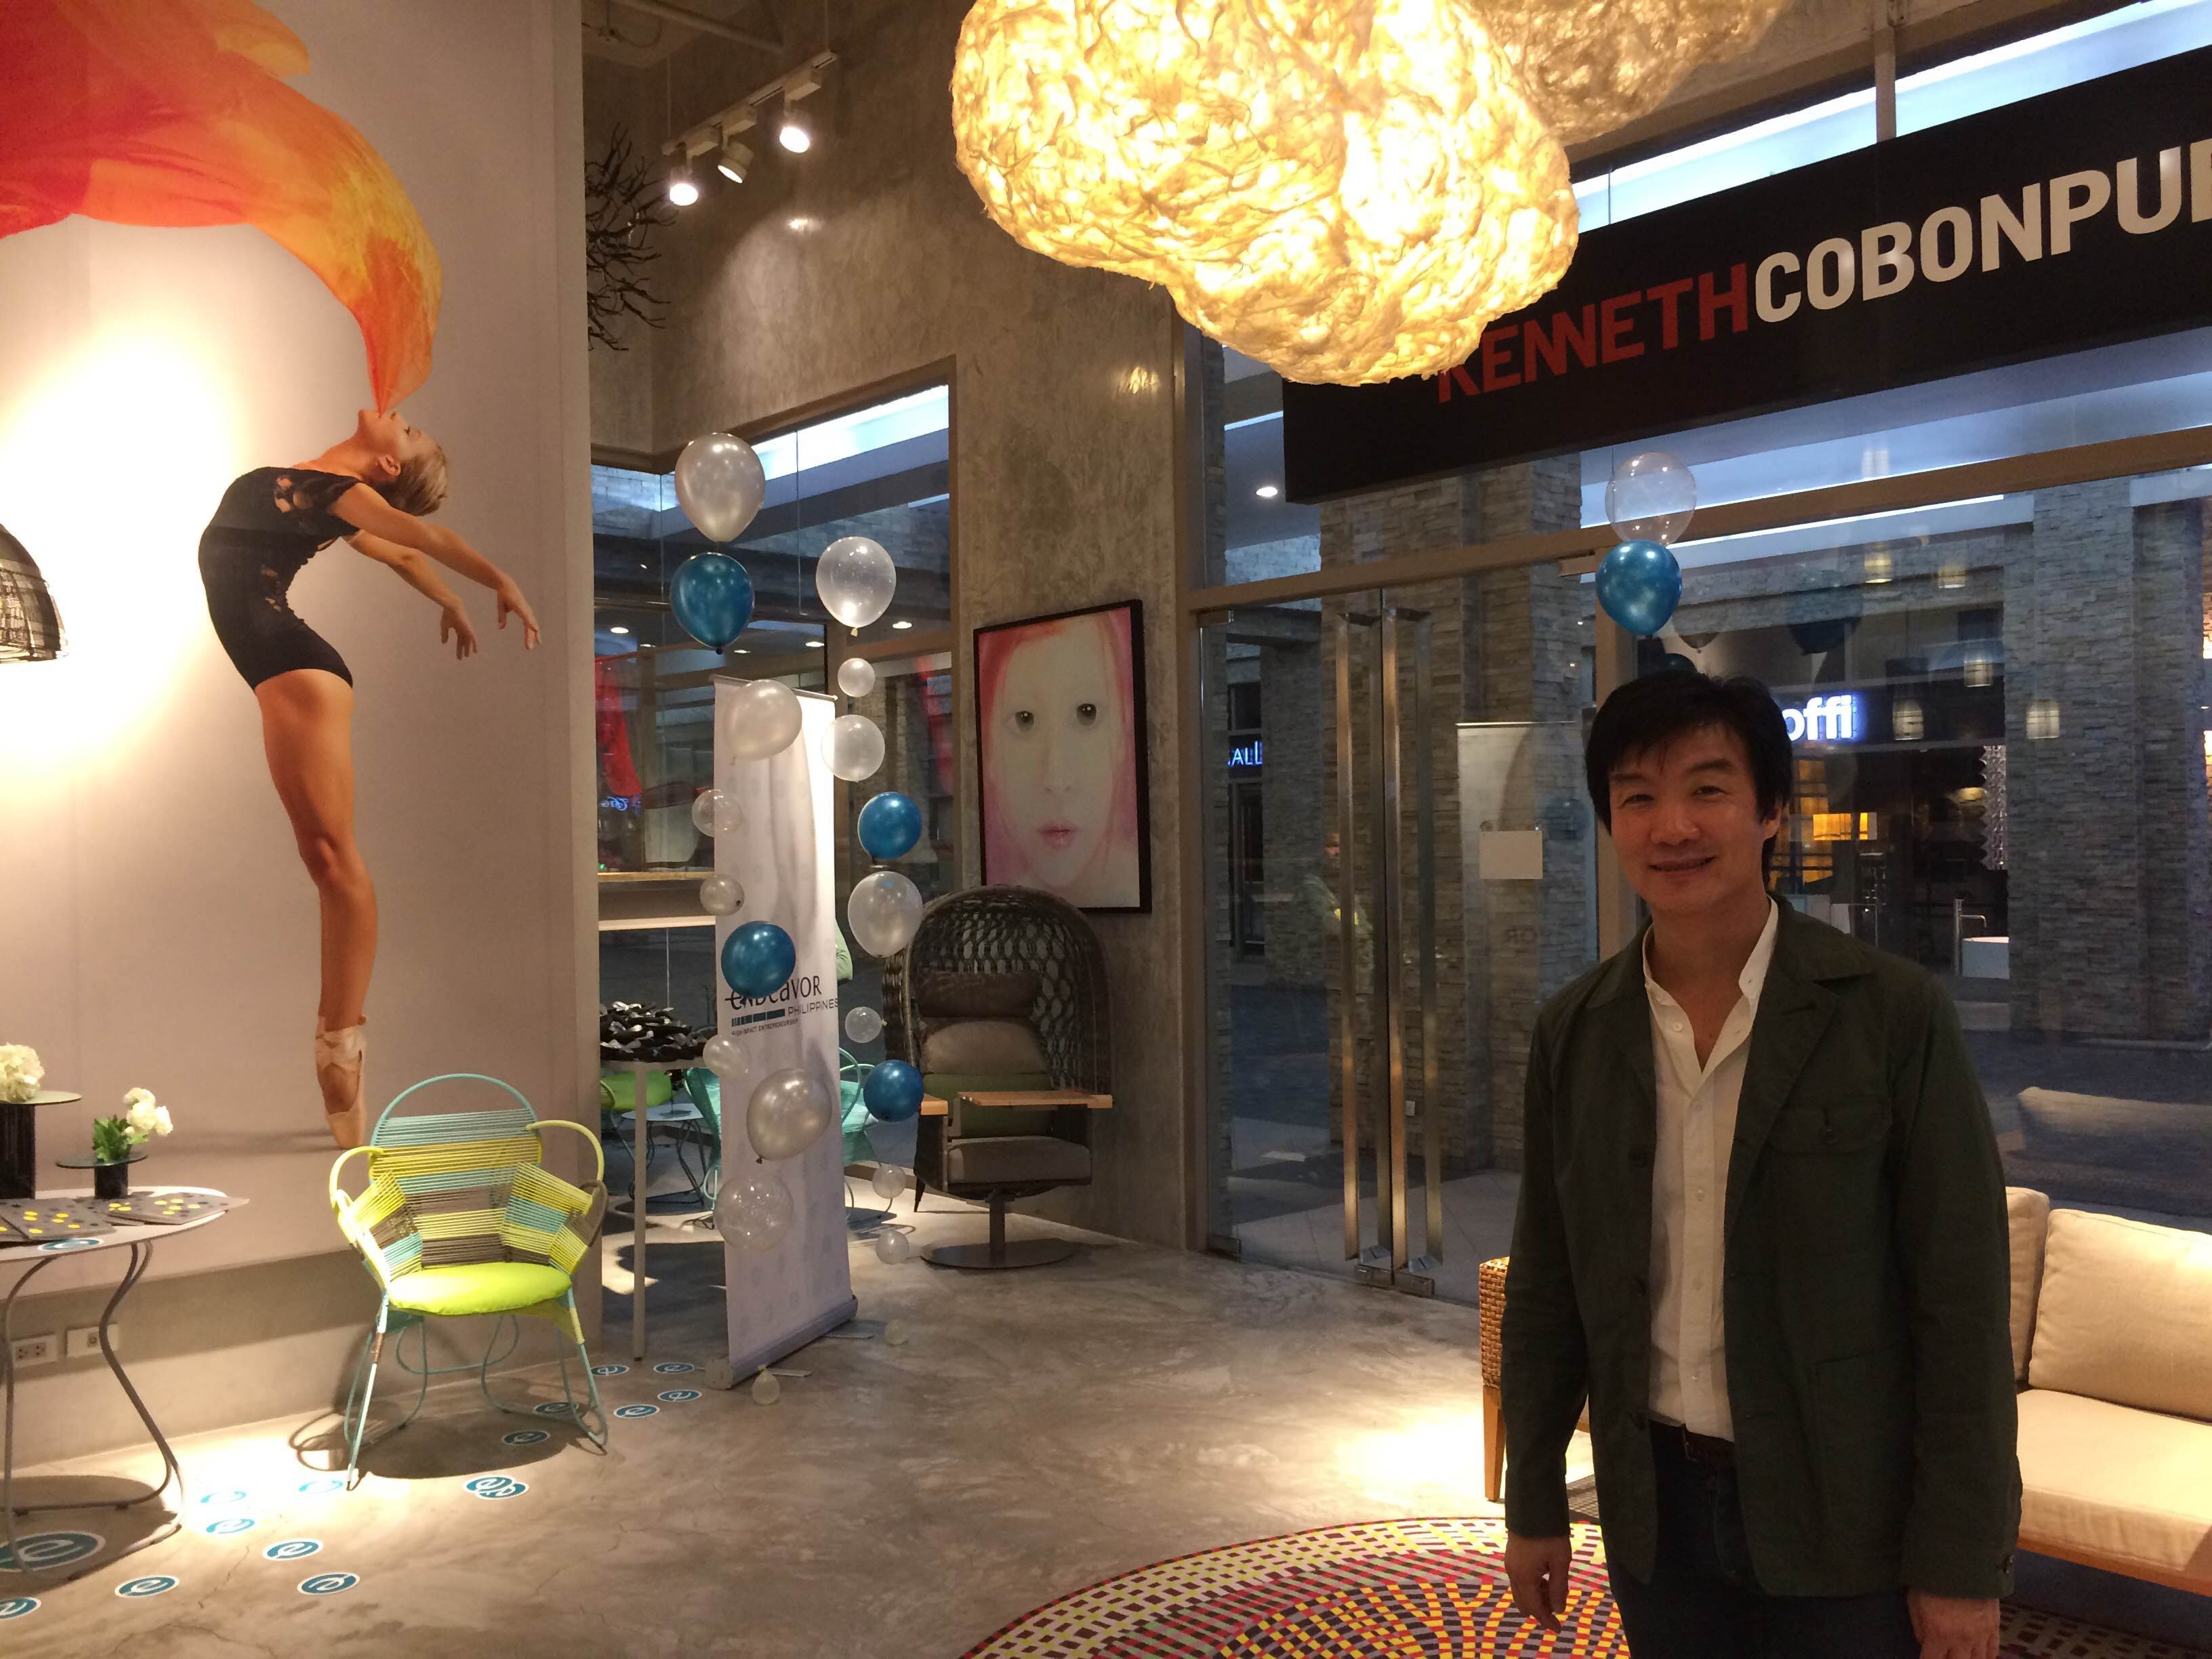 INFLUENCER. 'Innovation and creativity are the heart of it and why we exist as a company,' says furniture designer and entrepreneur Kenneth Cobonpue. Photo by Chris Schnabel/Rappler 